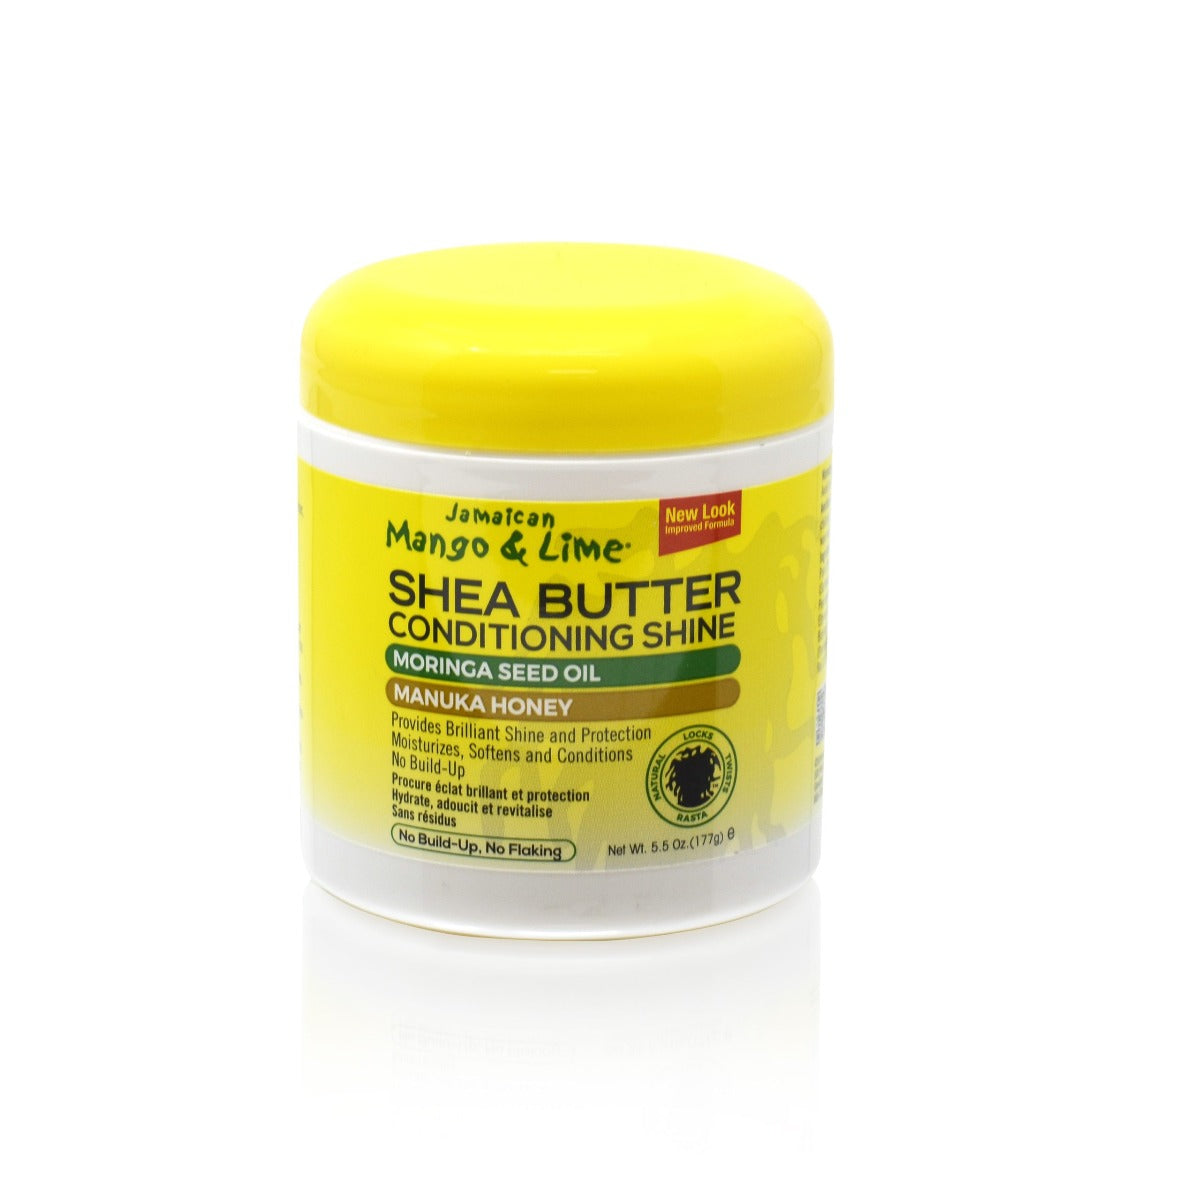 Jamaican Mango & Lime Shea Butter Conditioning Shine Hairdress